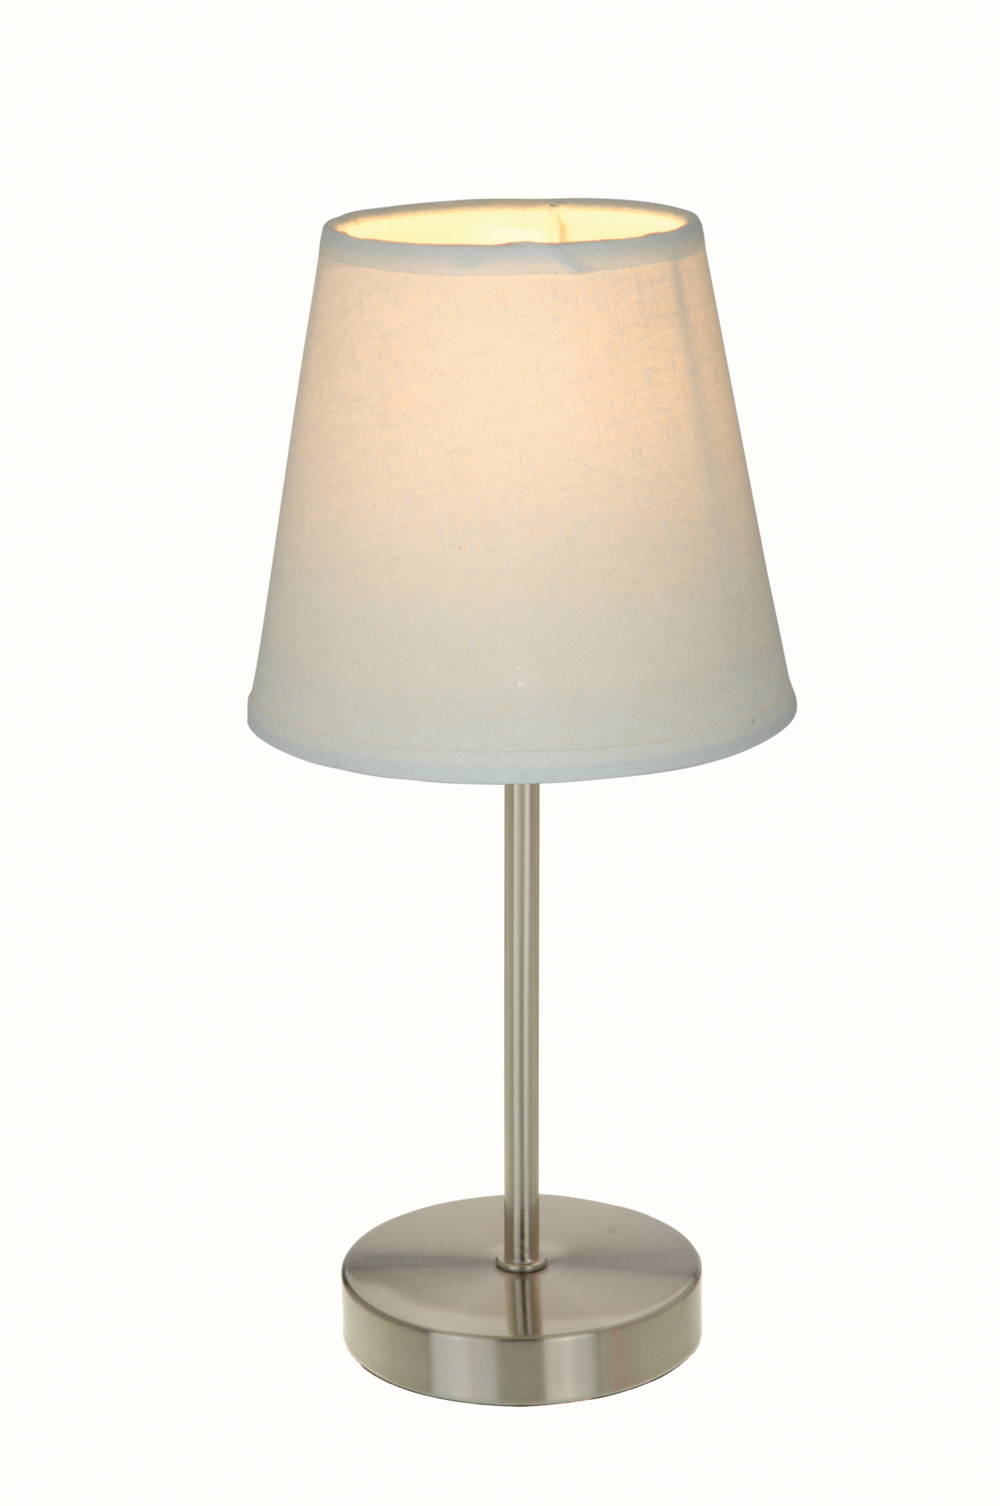 Simple Designs Sand Nickel Basic Table Lamp with White Shade